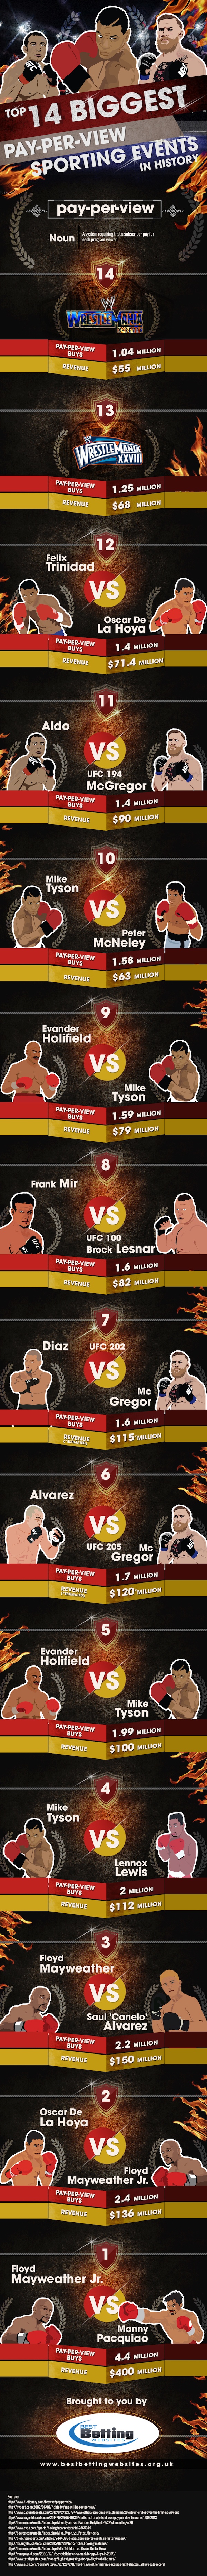 14 Biggest Pay-Per-View Buys in Sporting History (Infographic)